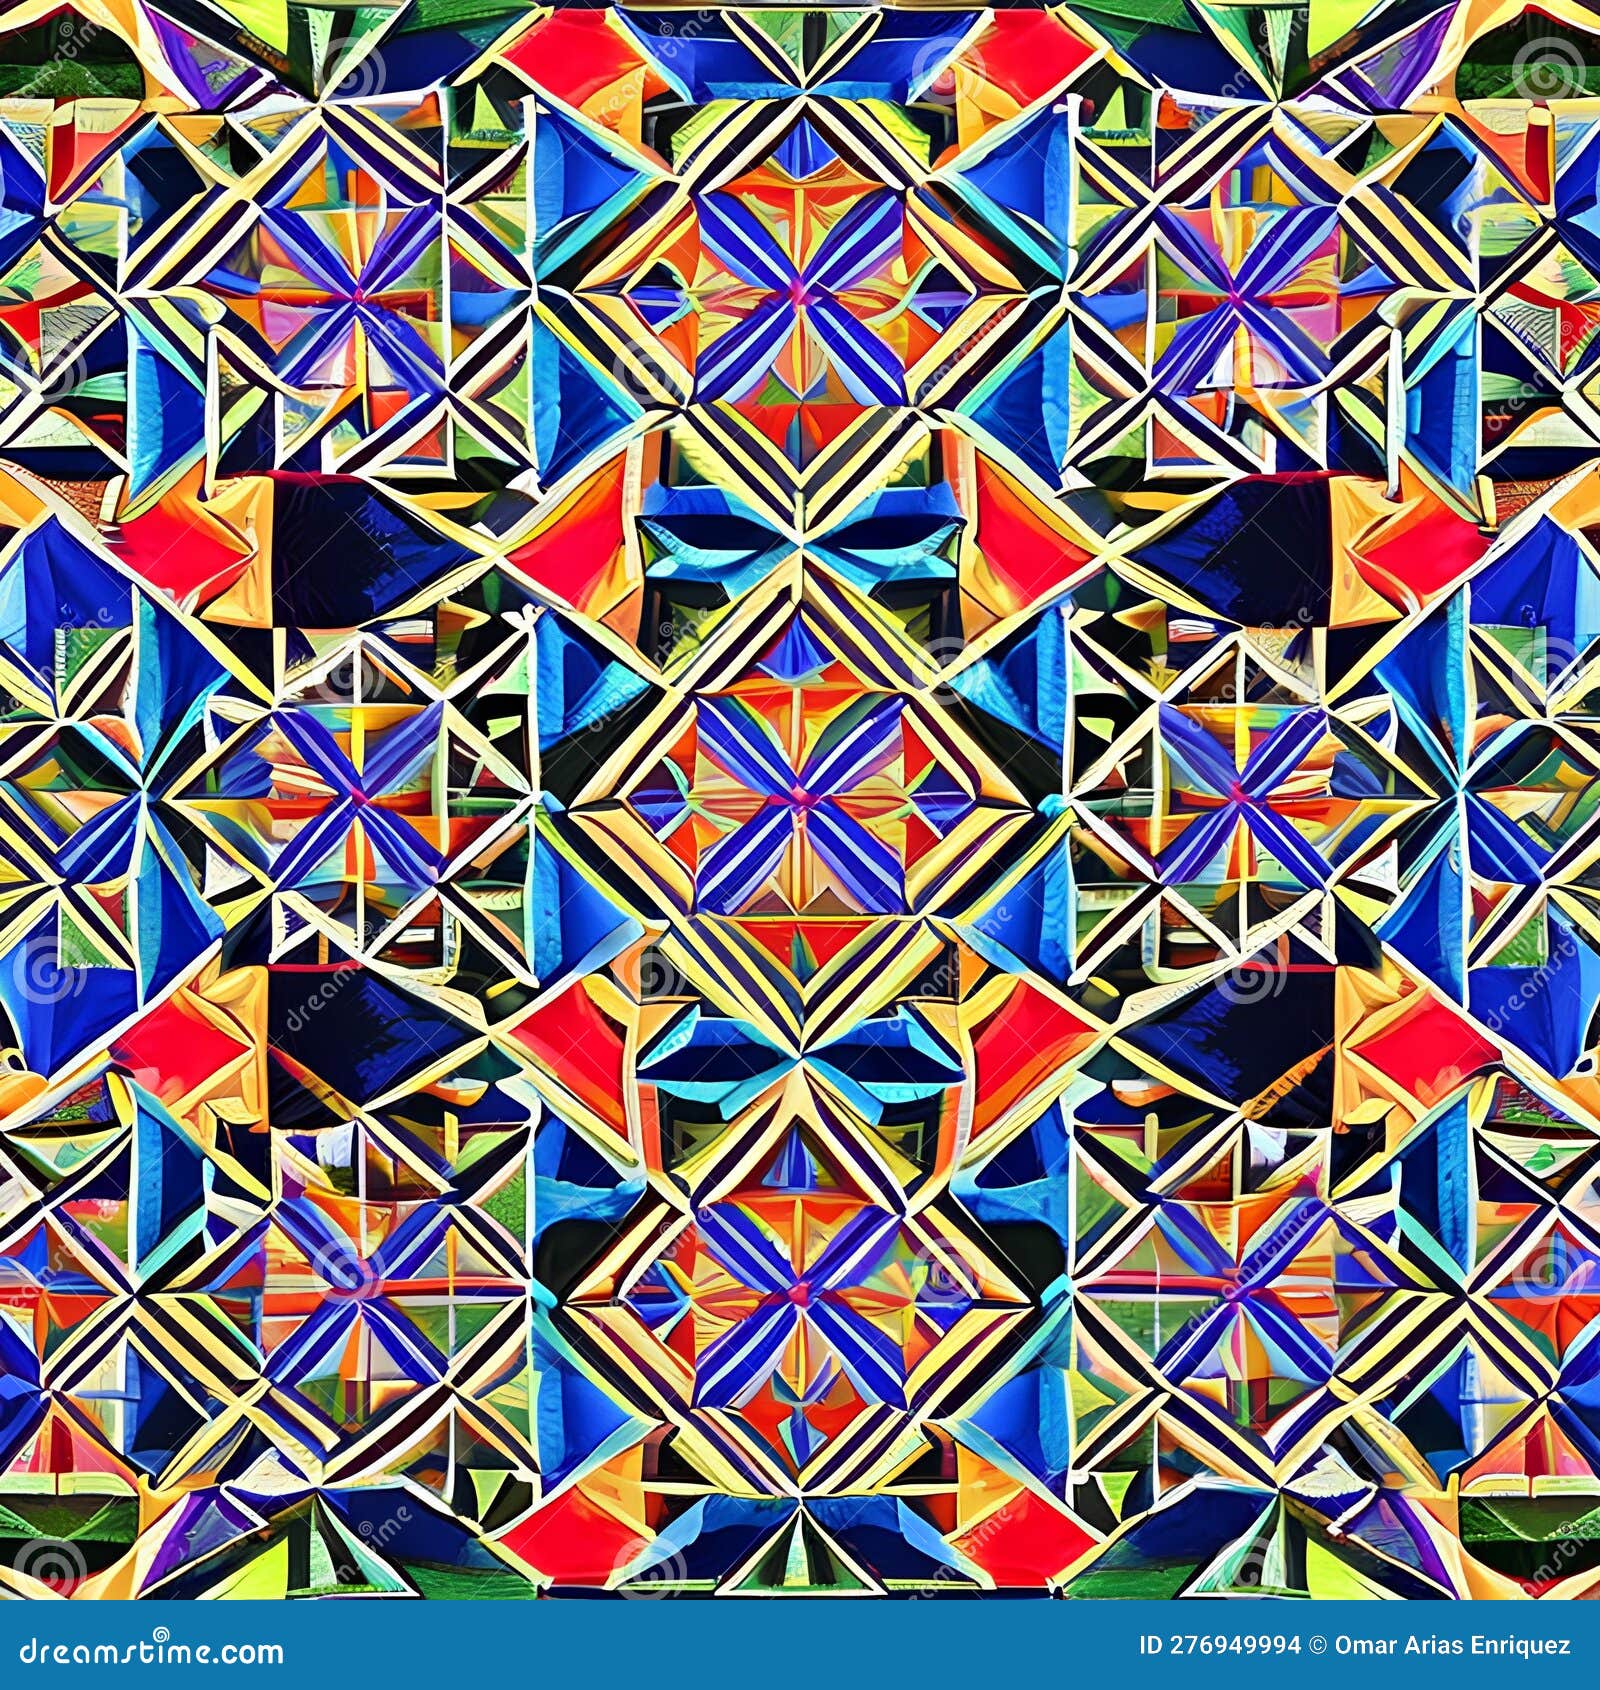 tetrahedral tapestry: an image of a geometric pattern created with tetrahedra, in a mix of vibrant colors and intricate s4